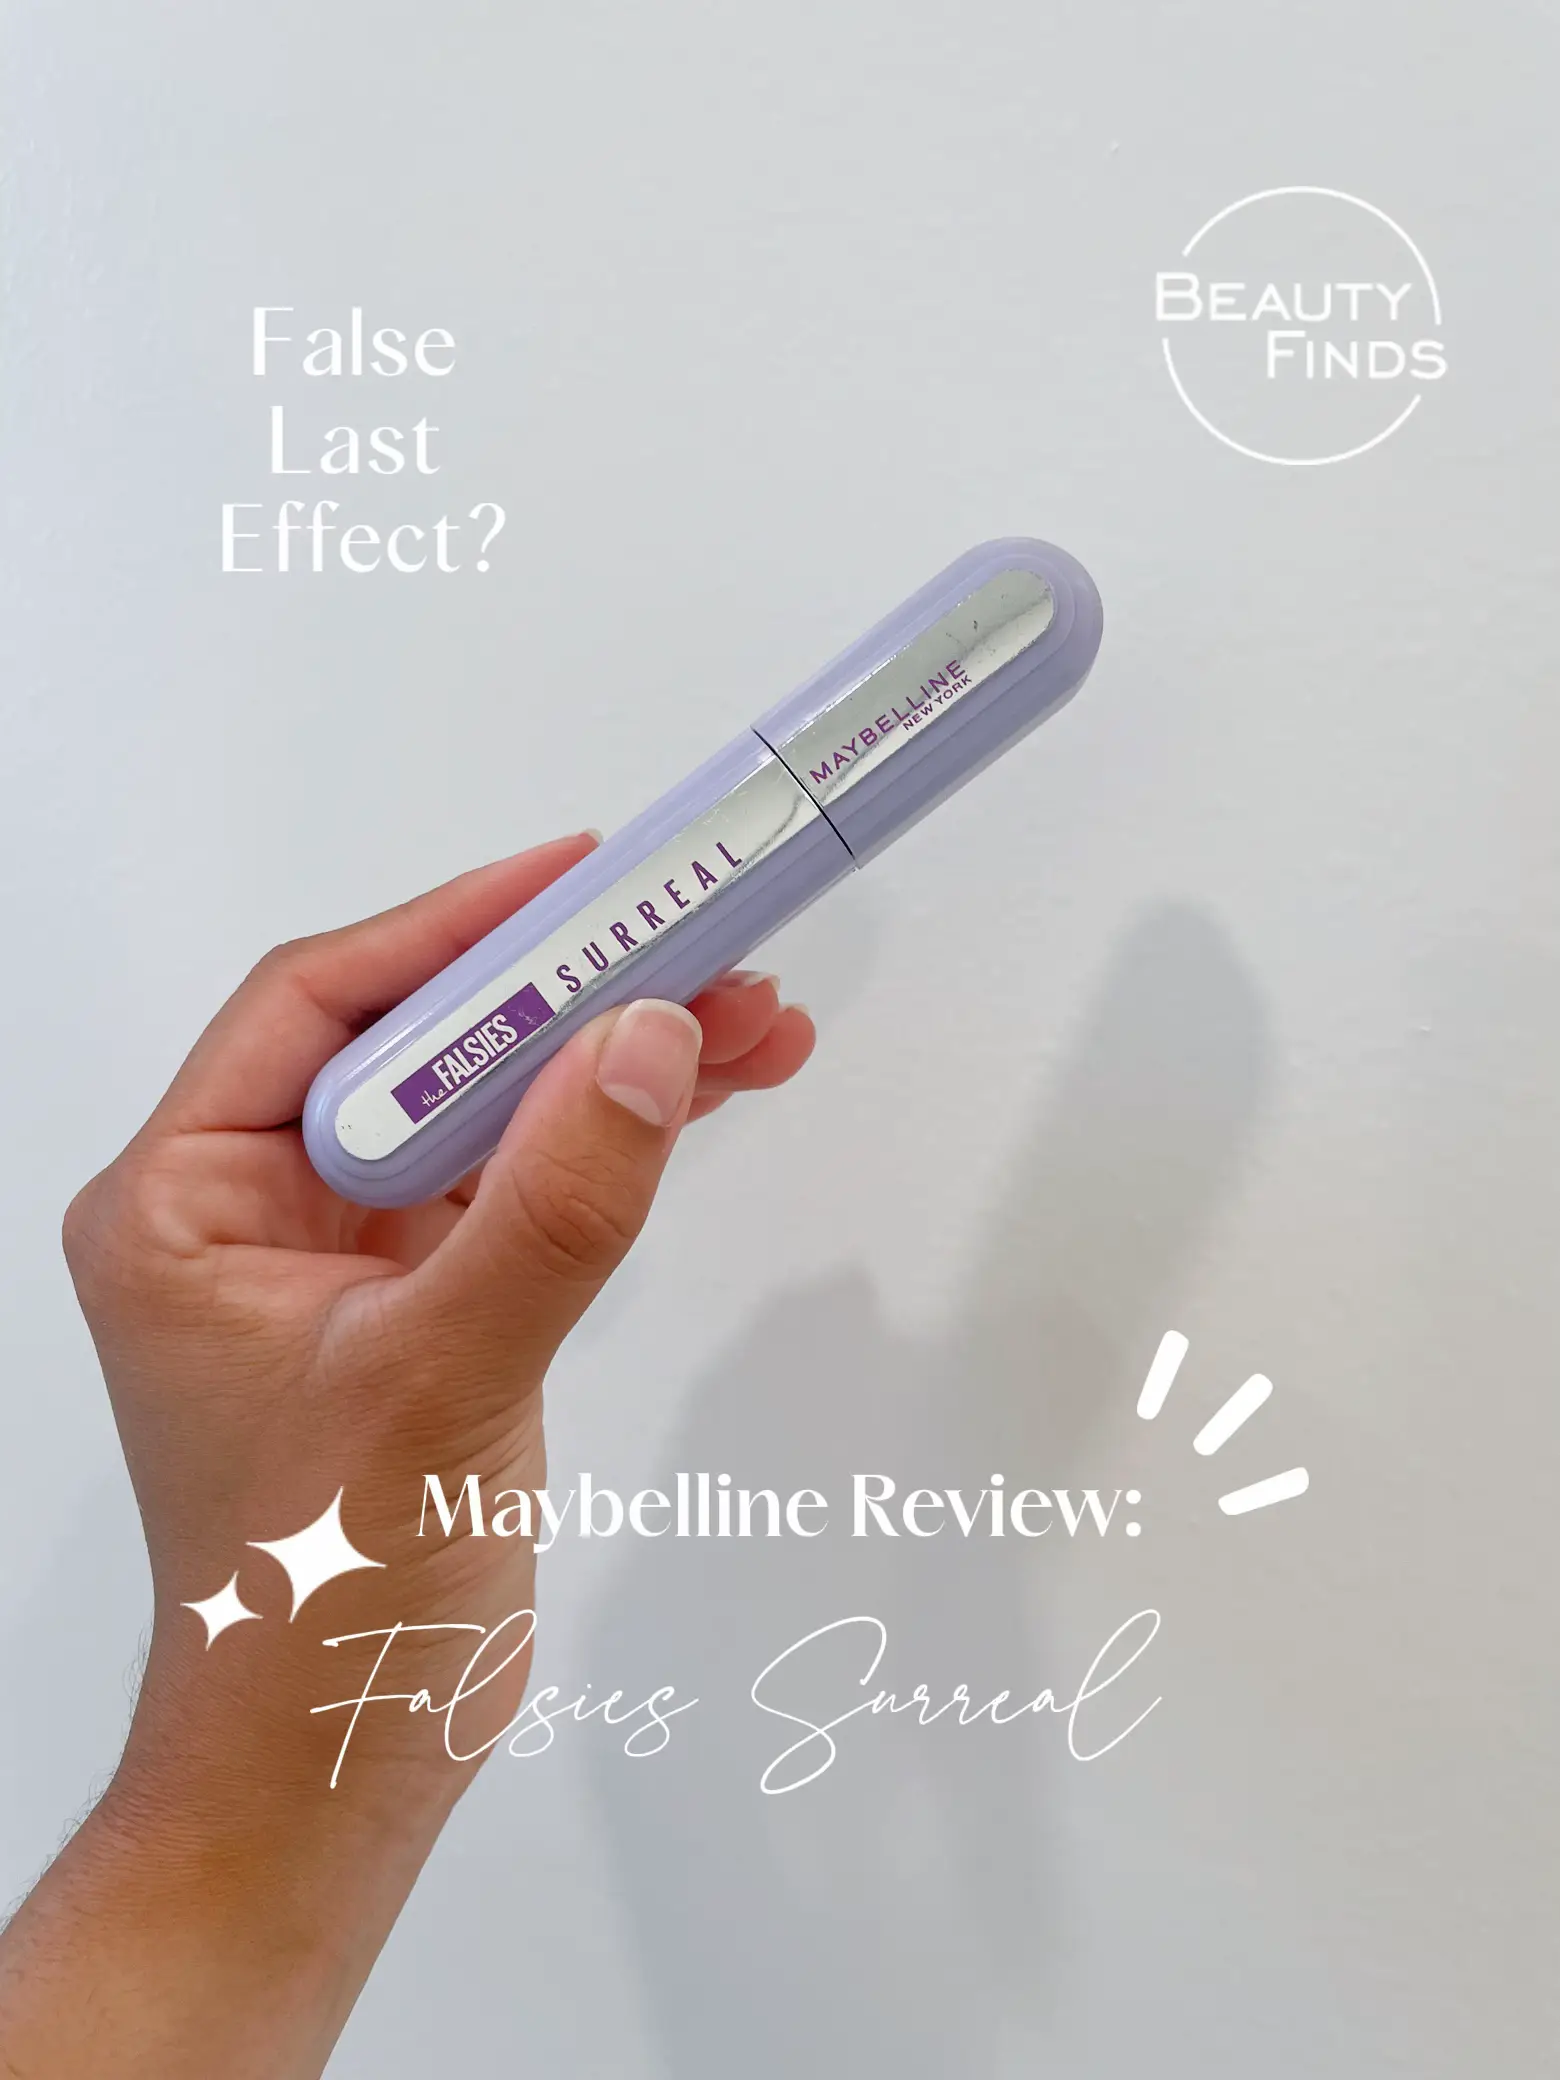 my thoughts on maybelline falsies surreal mascara | Gallery posted by nadia  lynn | Lemon8